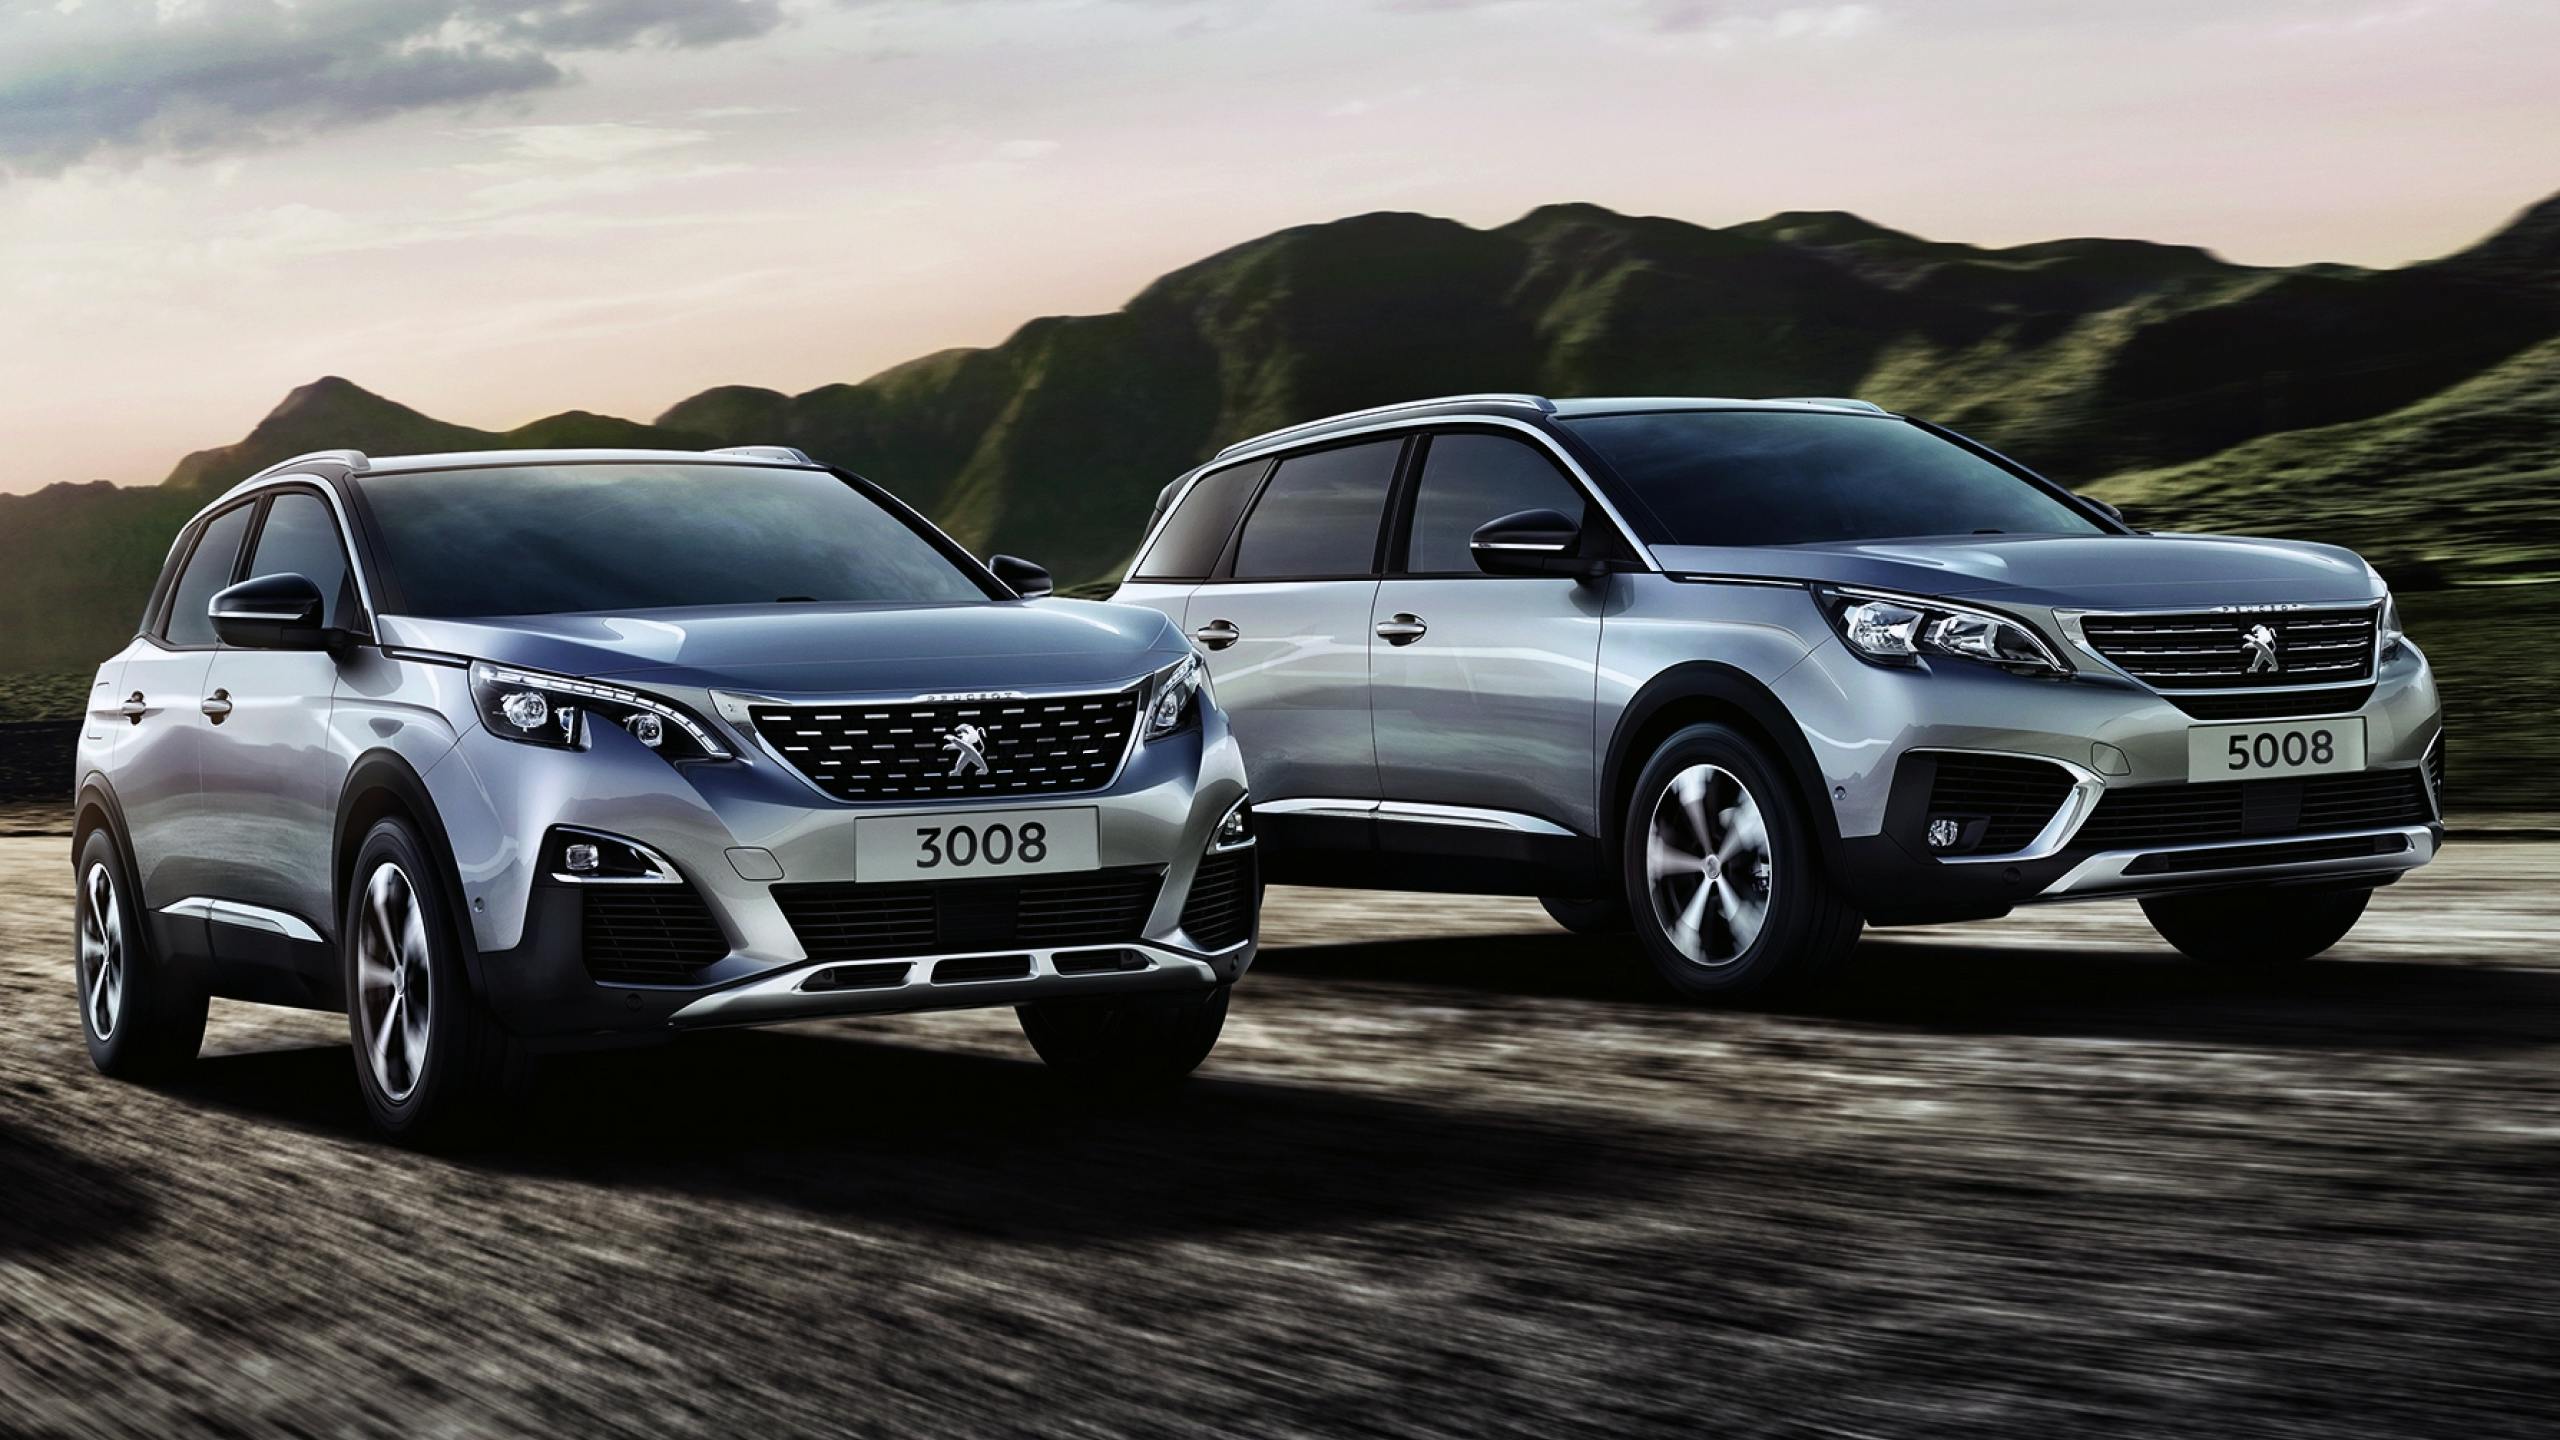 Two grey Peugeot 3008 and 5008